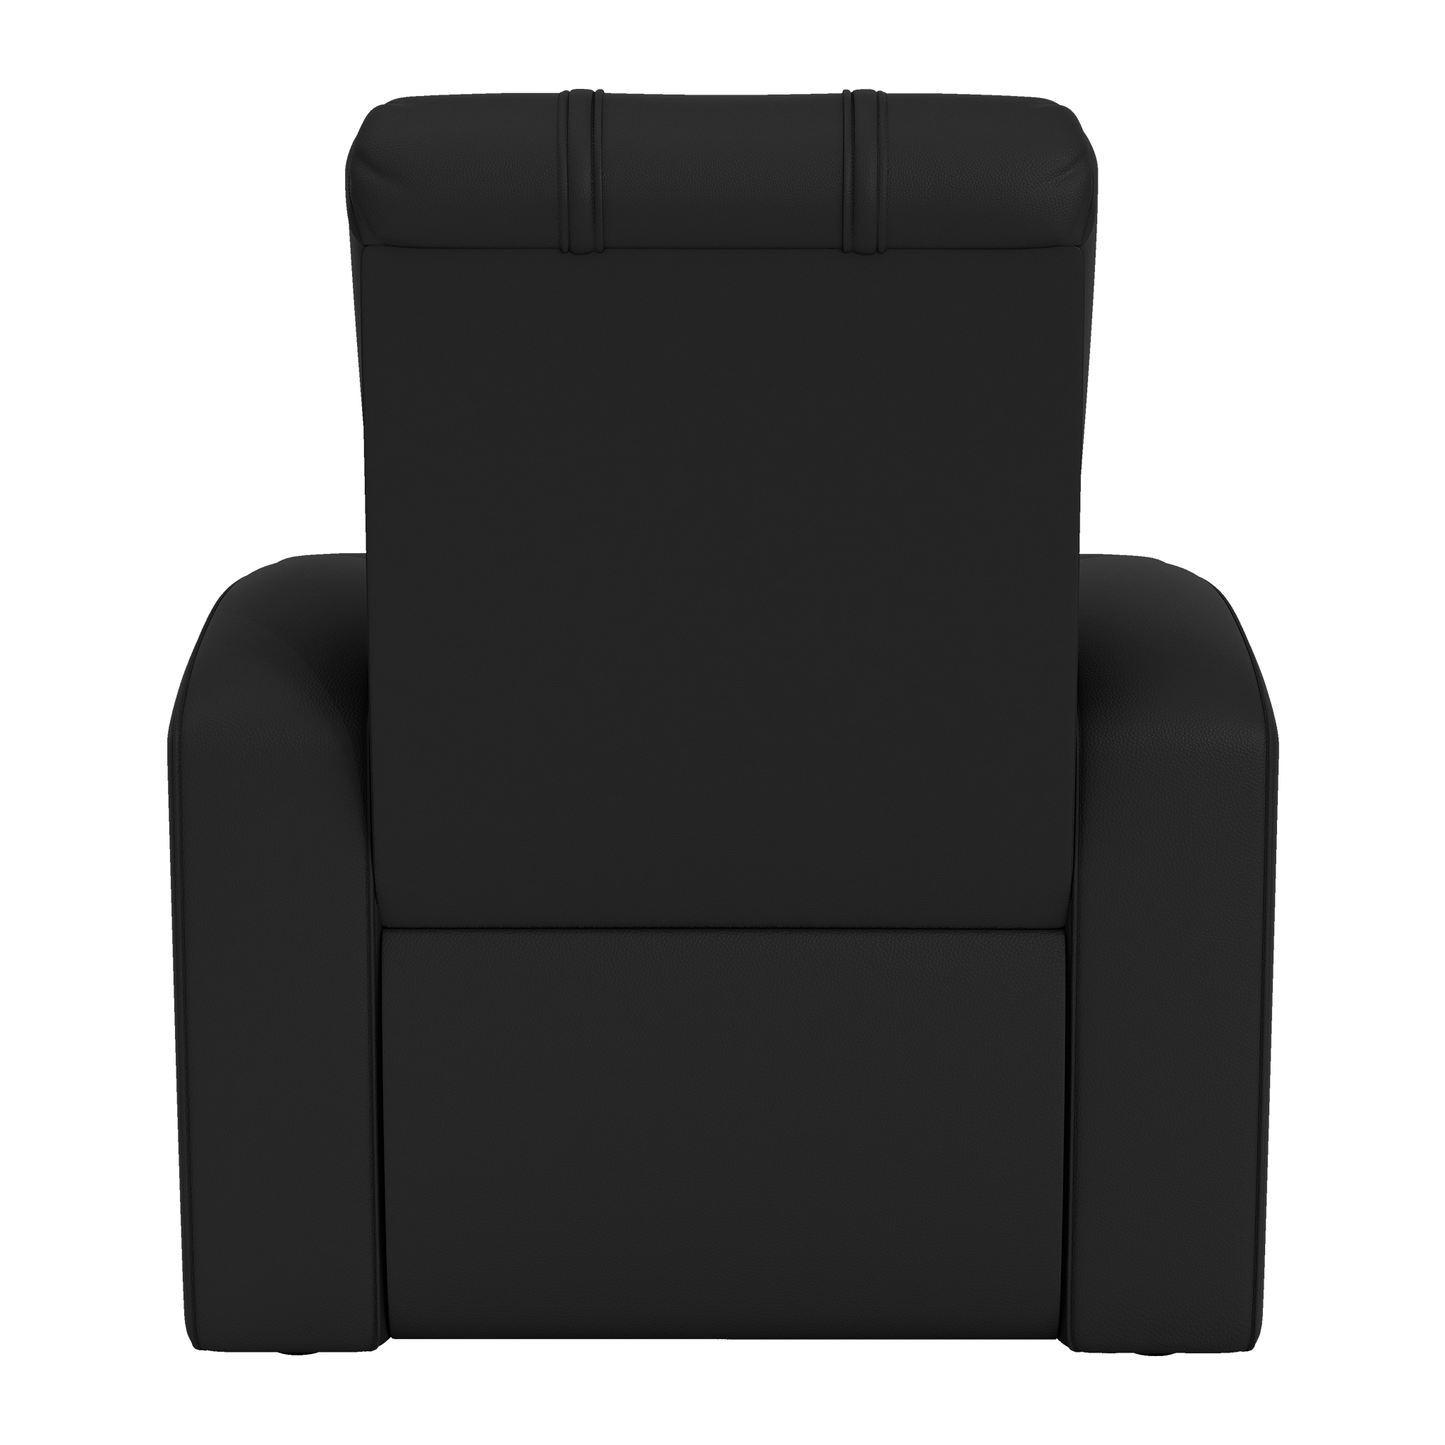 Relax Home Theater Recliner with San Diego Padres Primary Logo